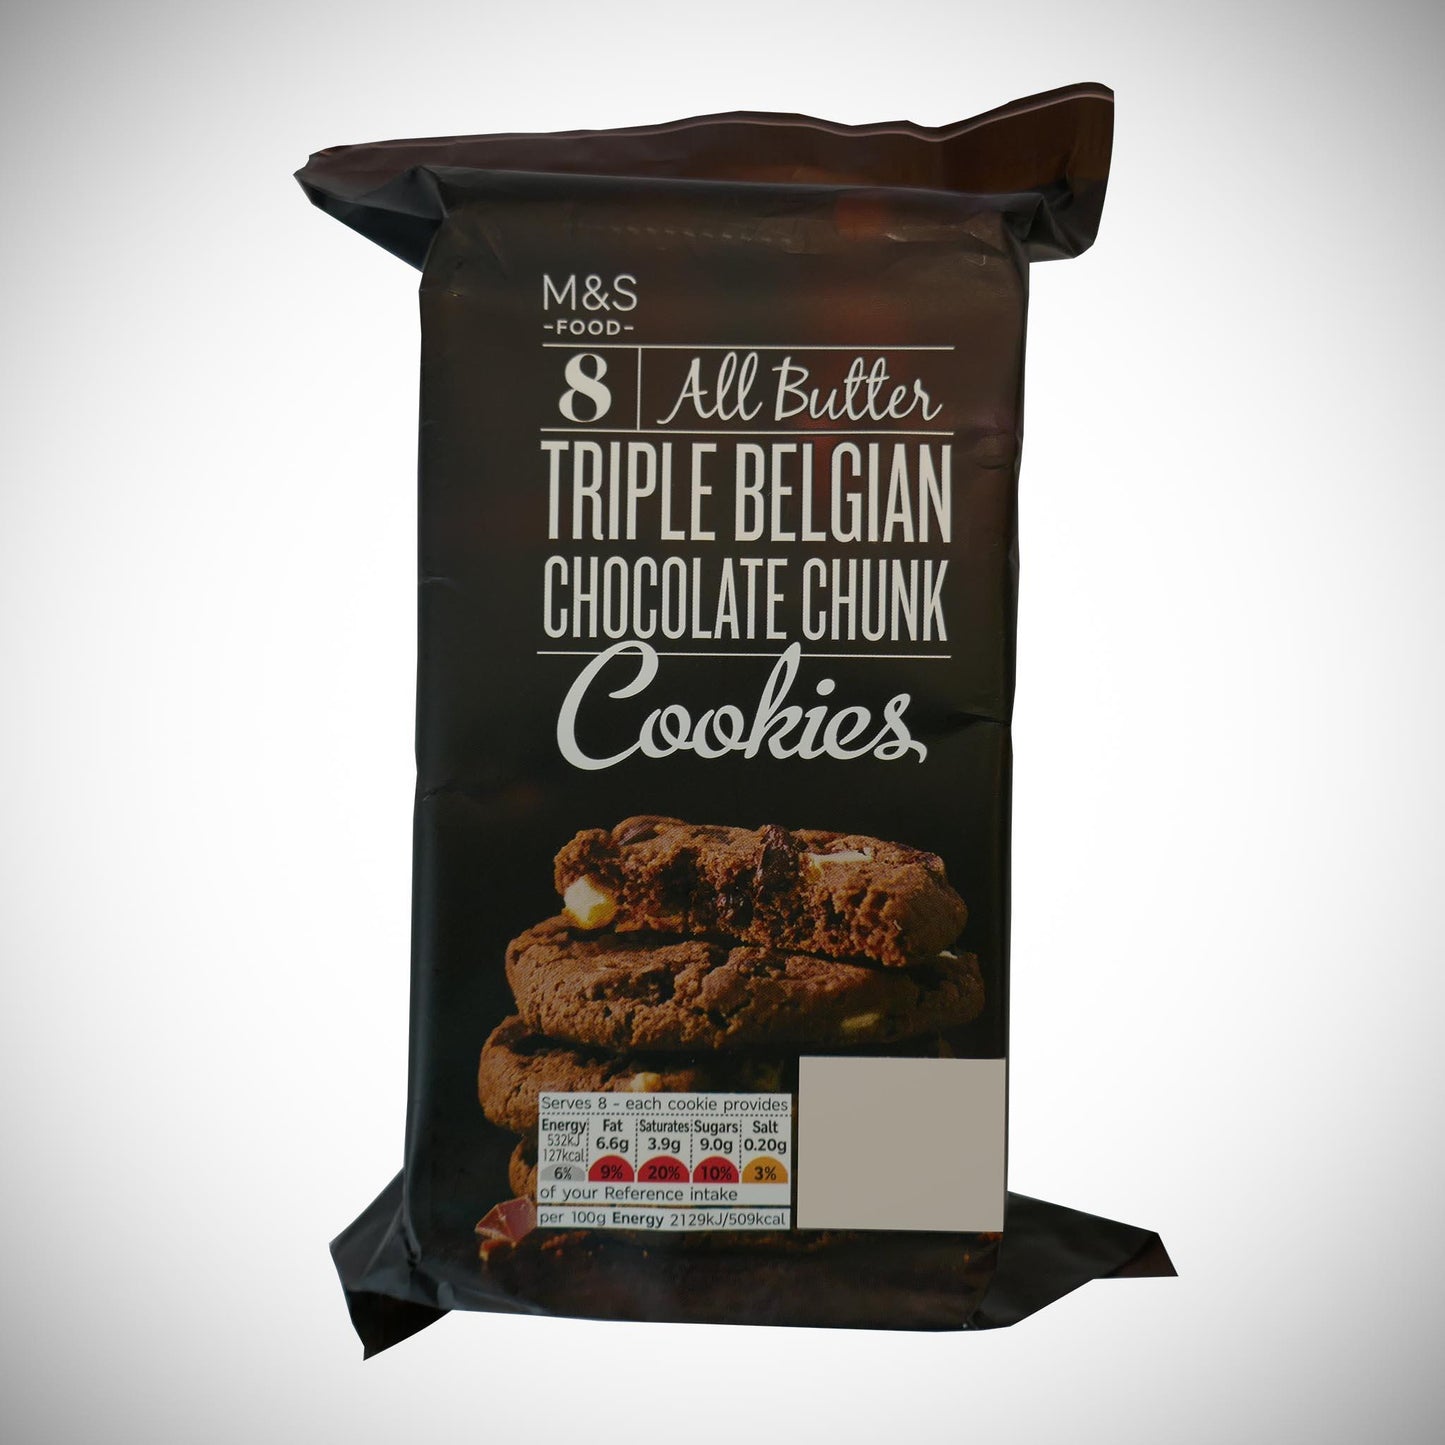 M&S All Butter Triple Belgian Chocolate Chunk Cookies